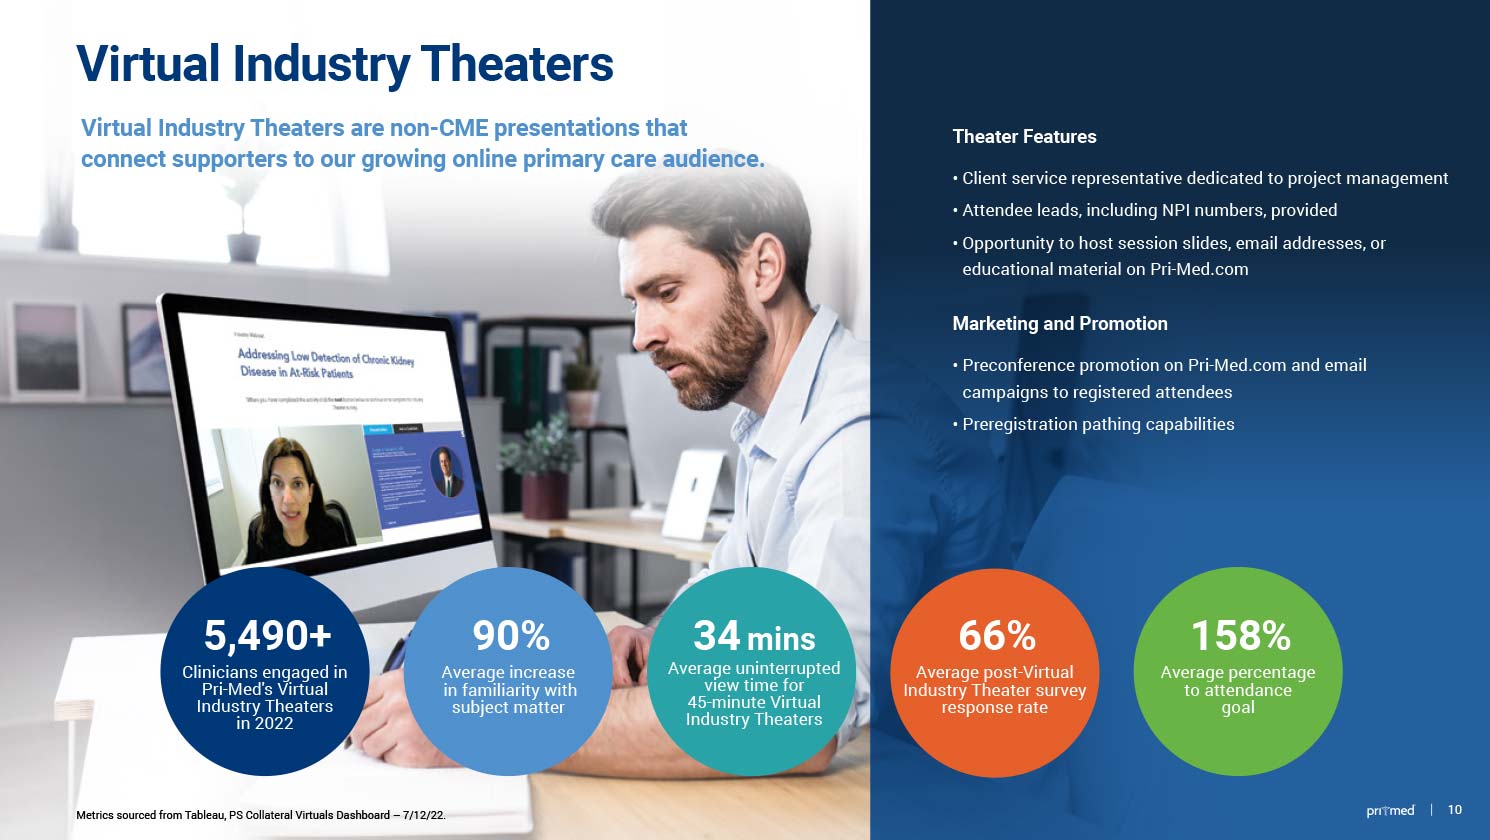 Sample Pri-Med PPT presentation page with title "Virtual Industry Theaters"